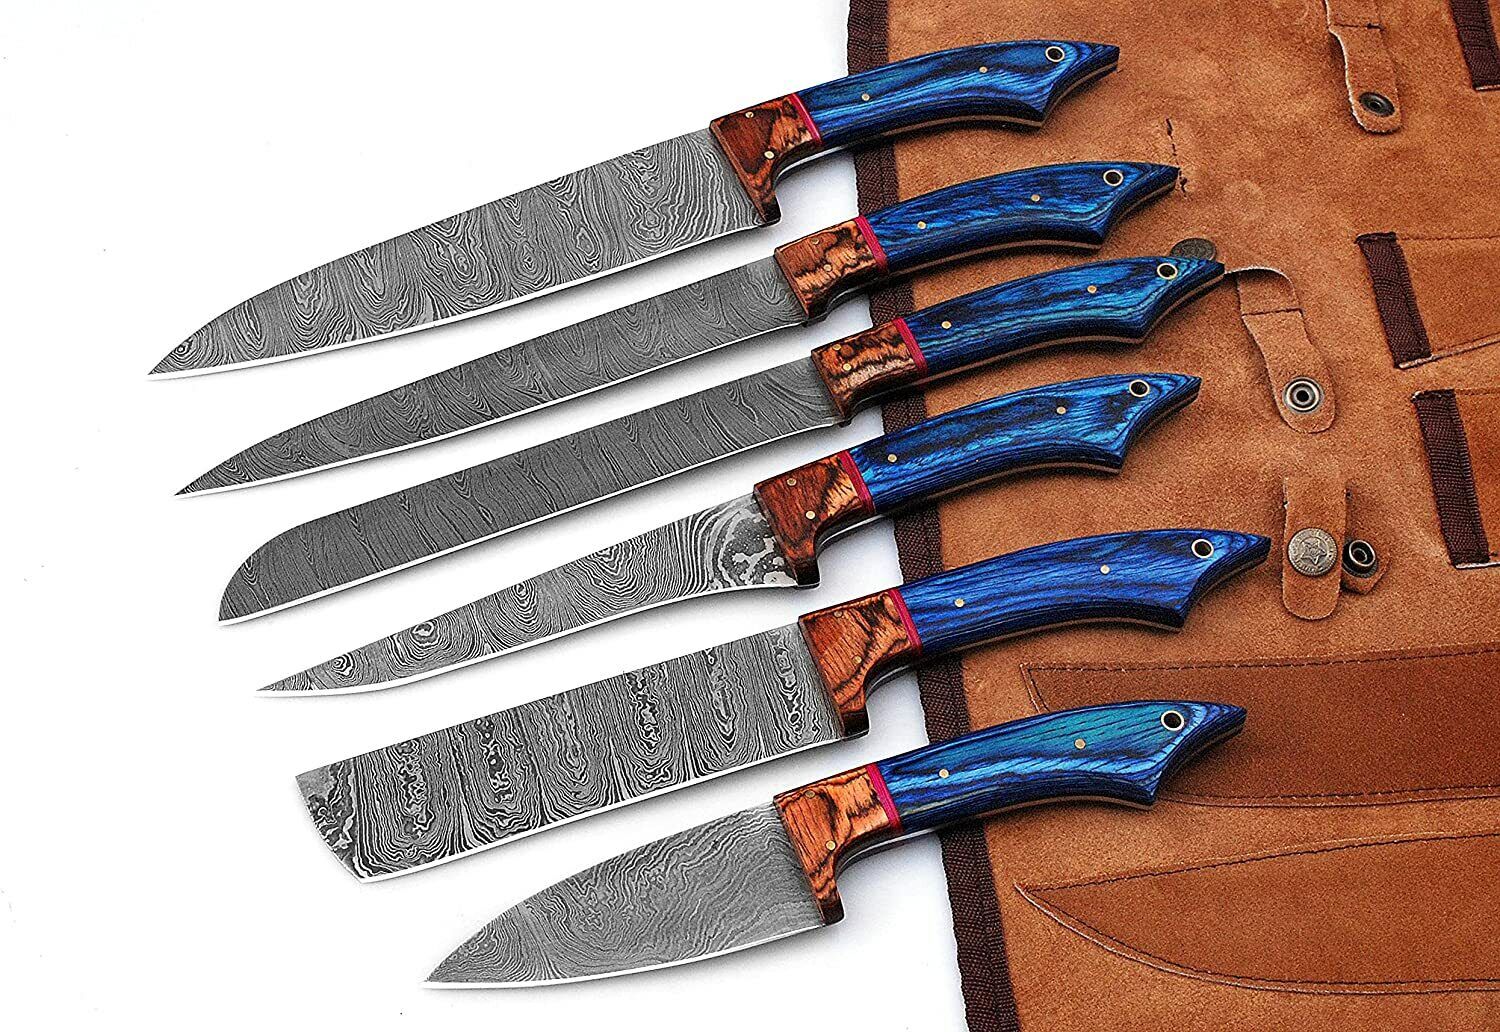 Handmade Professional Kitchen Damascus Knife Set, 6pcs With leather Roll Bag